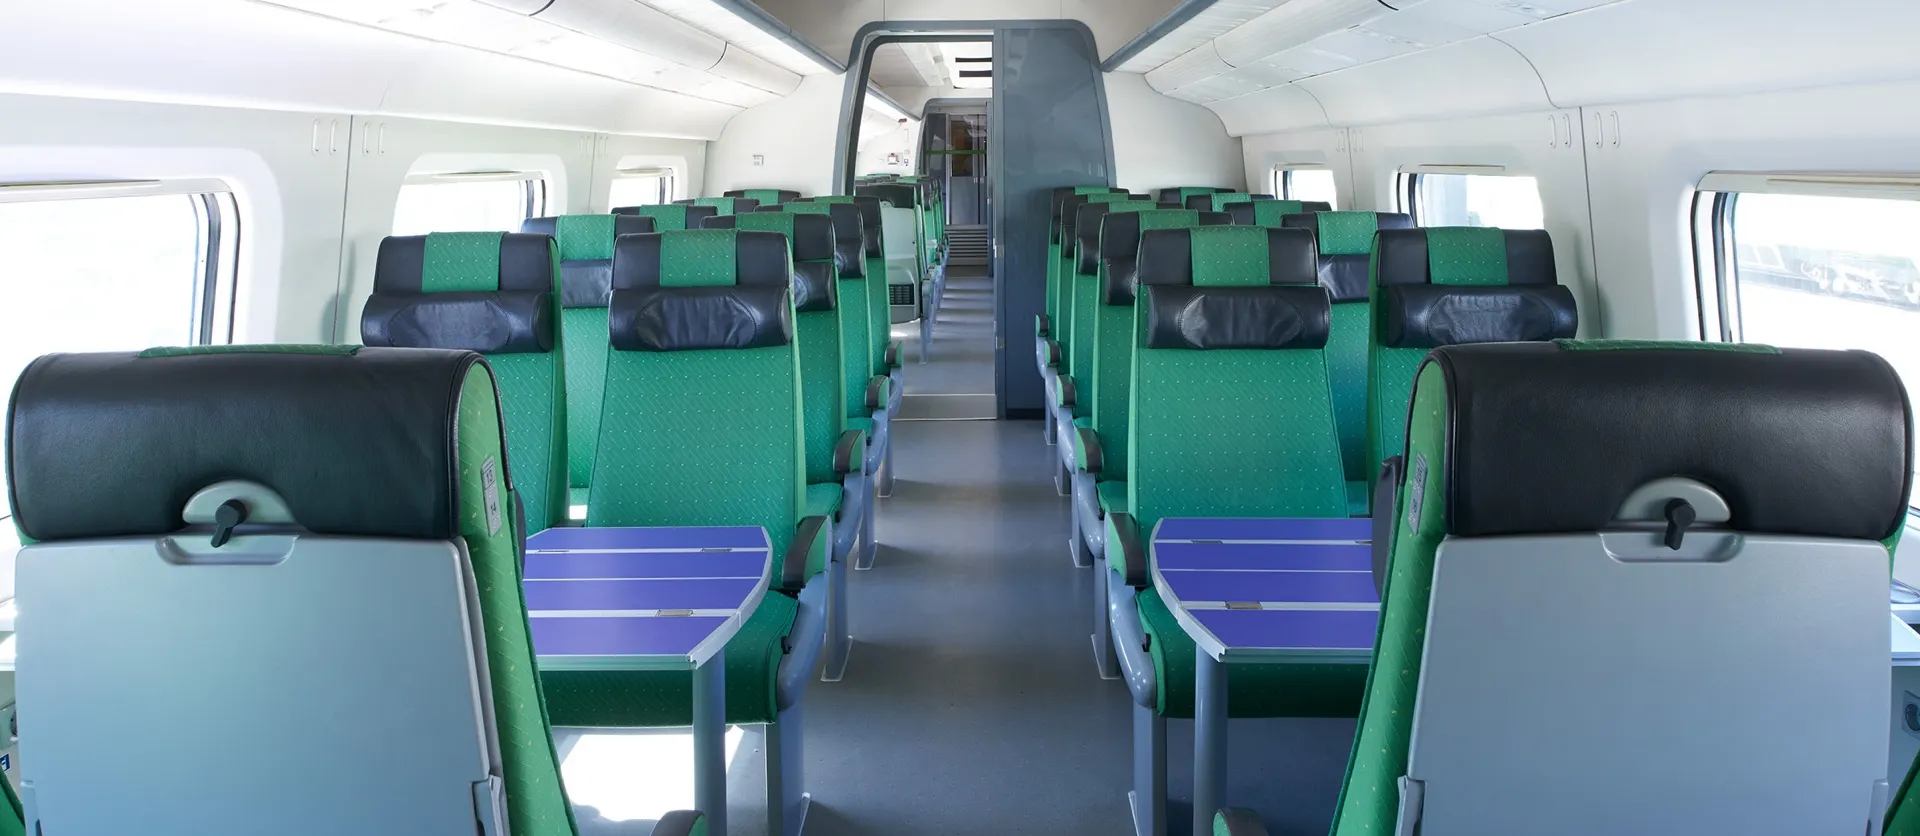 On board Pendolino trains, there are two adjacent seats on both sides of the centre aisle. The trains also have seating with tables for four people.